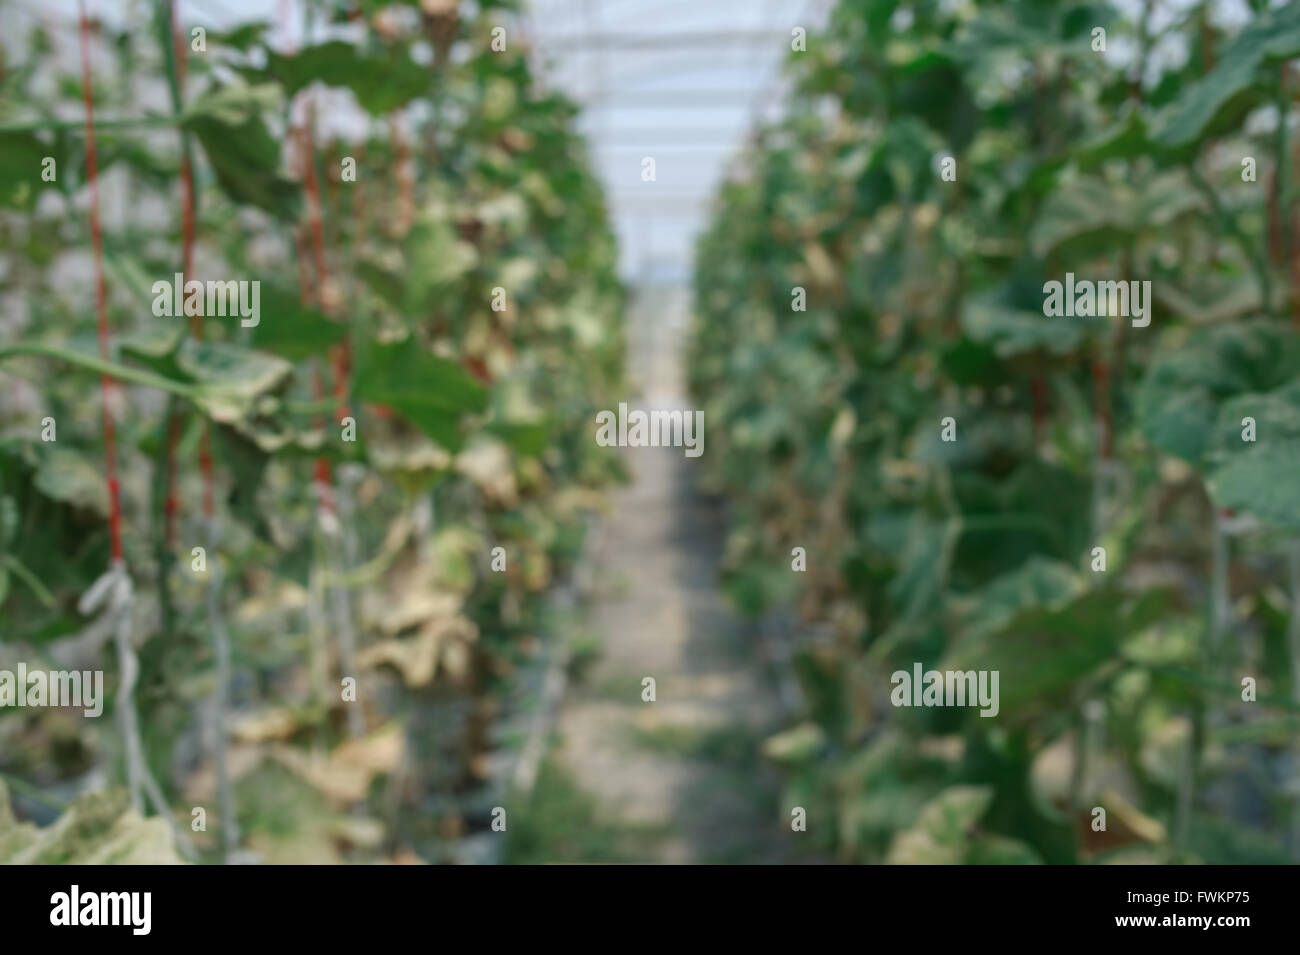 Defocus Melon in greenhouse on field agriculture Stock Photo